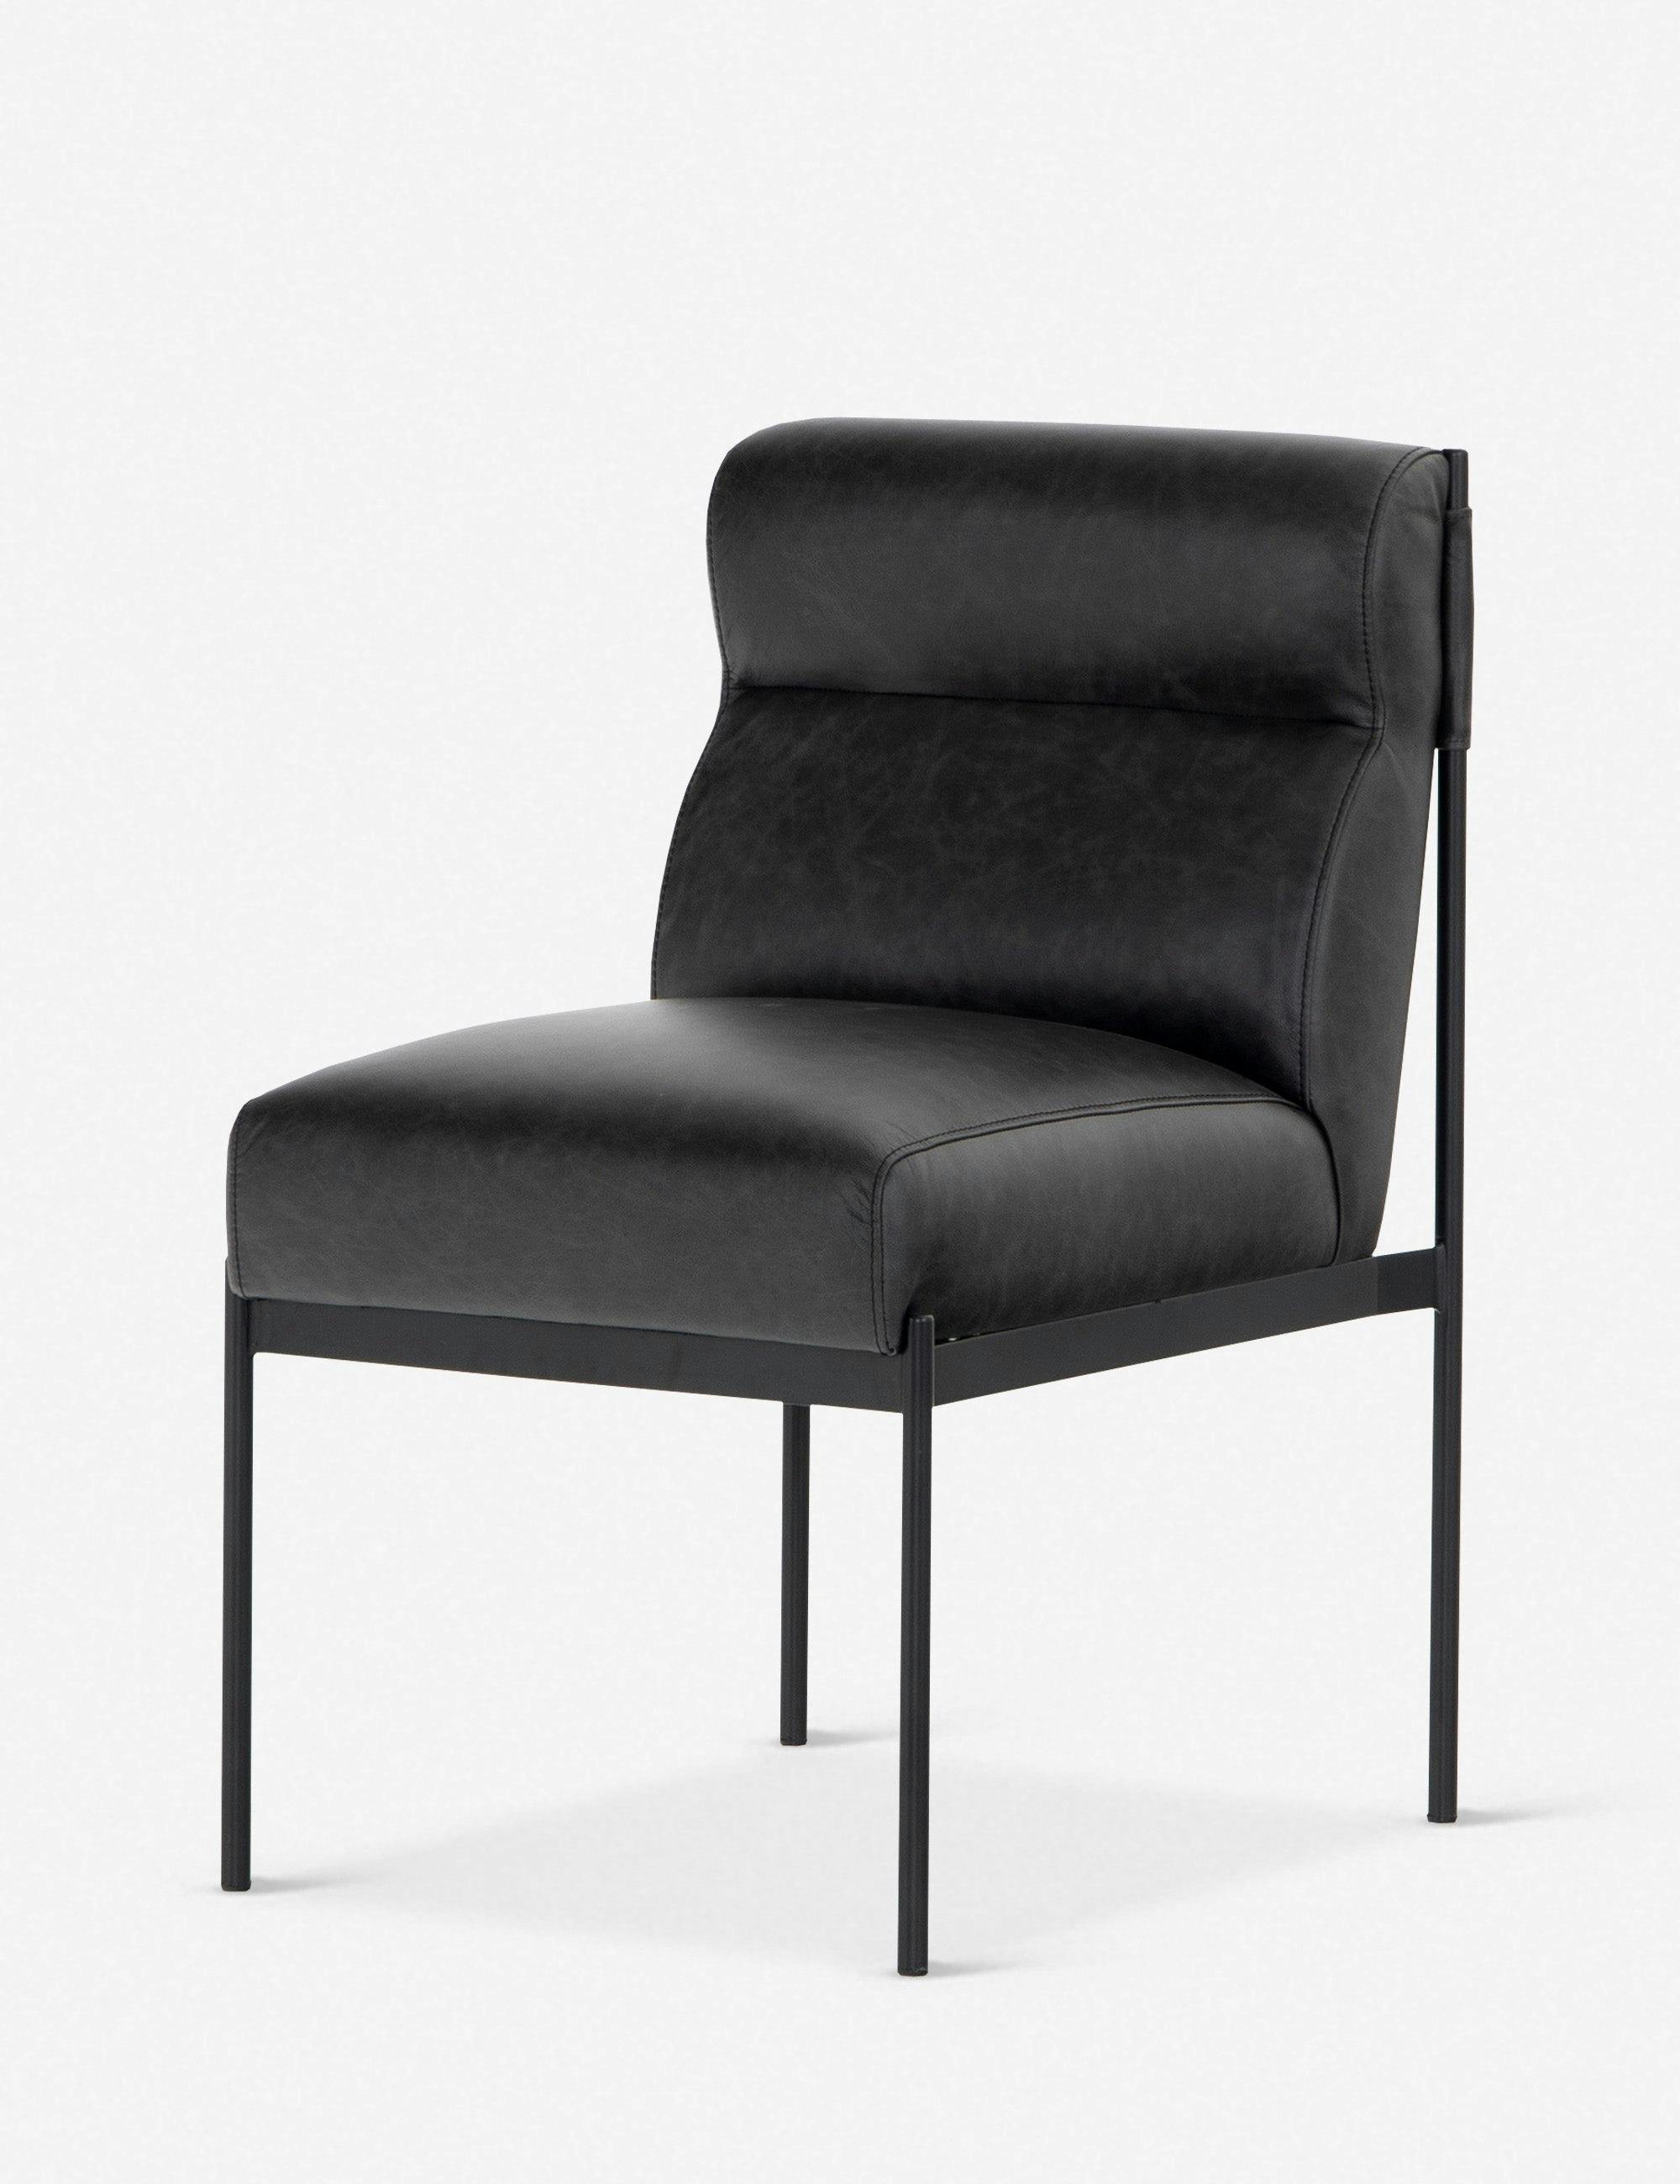 Salome Black Leather Upholstered Dining Chair